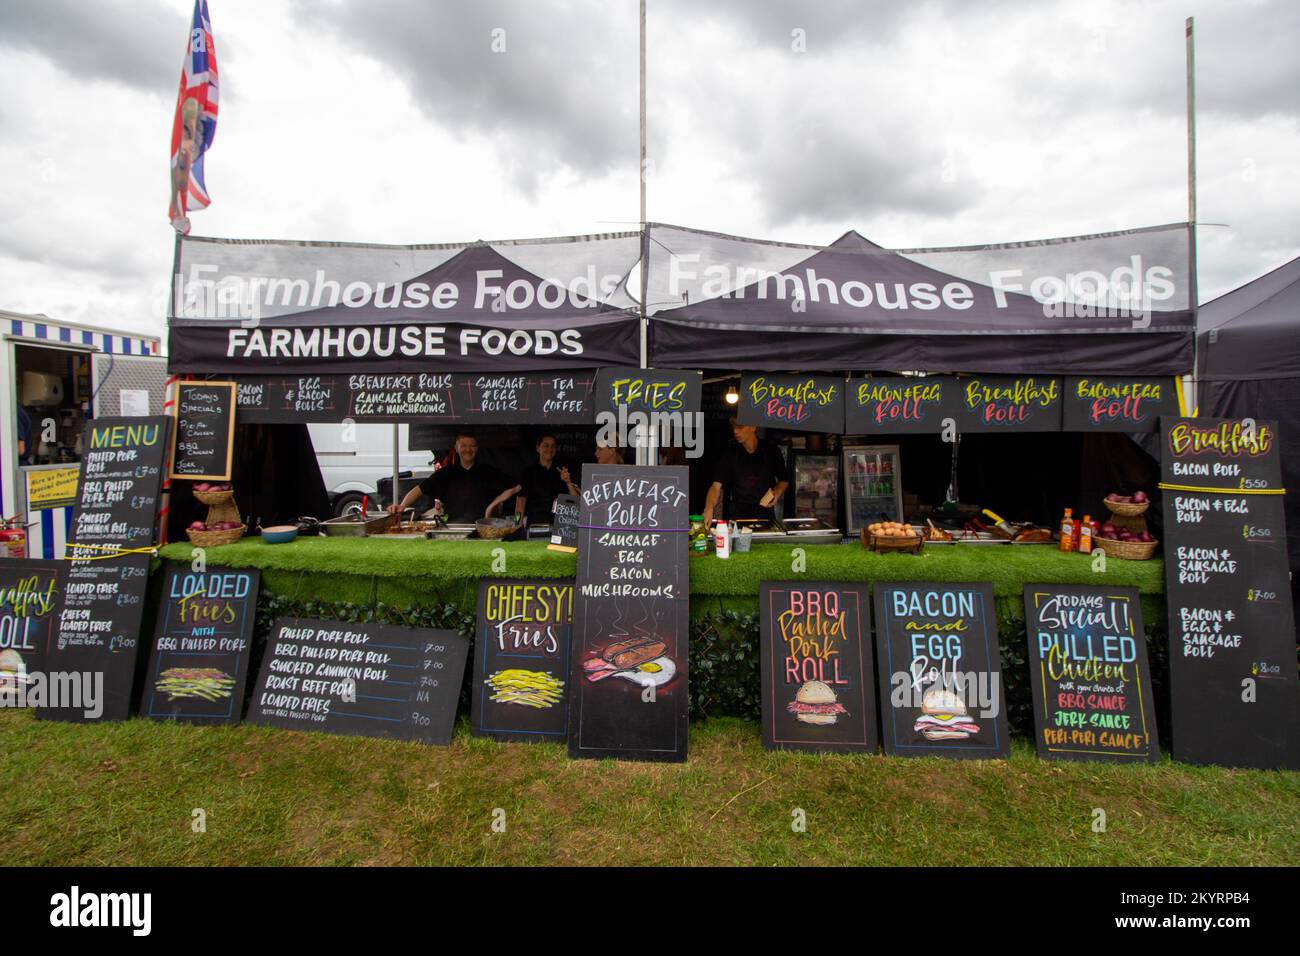 EXETER, DEVON, UK - JULY 1, 2022  trade stand - Farmhouse Foods Stock Photo